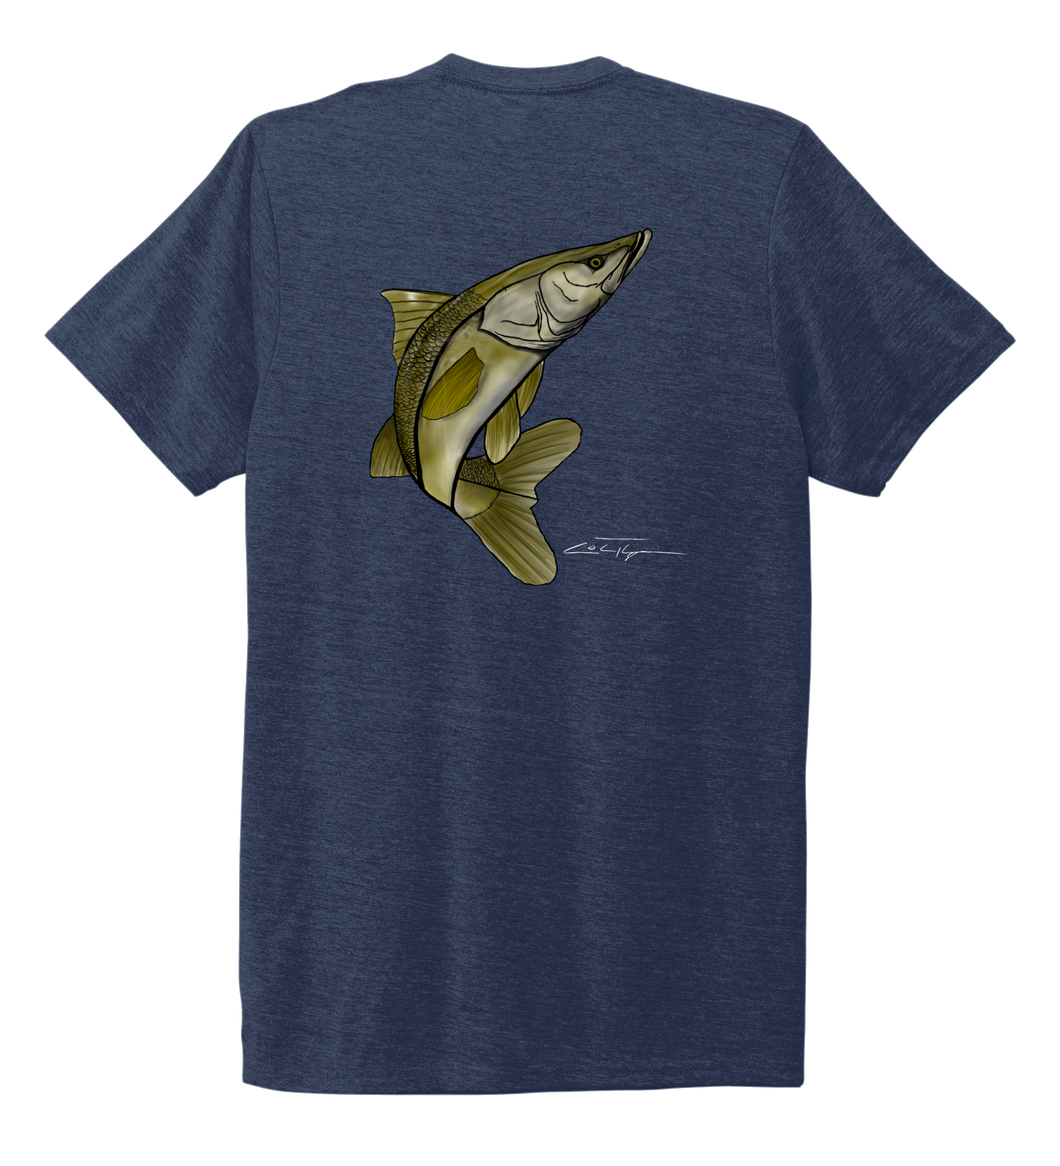 Colin Thompson, Snook, Crew Neck T-Shirt in Deep Sea Blue